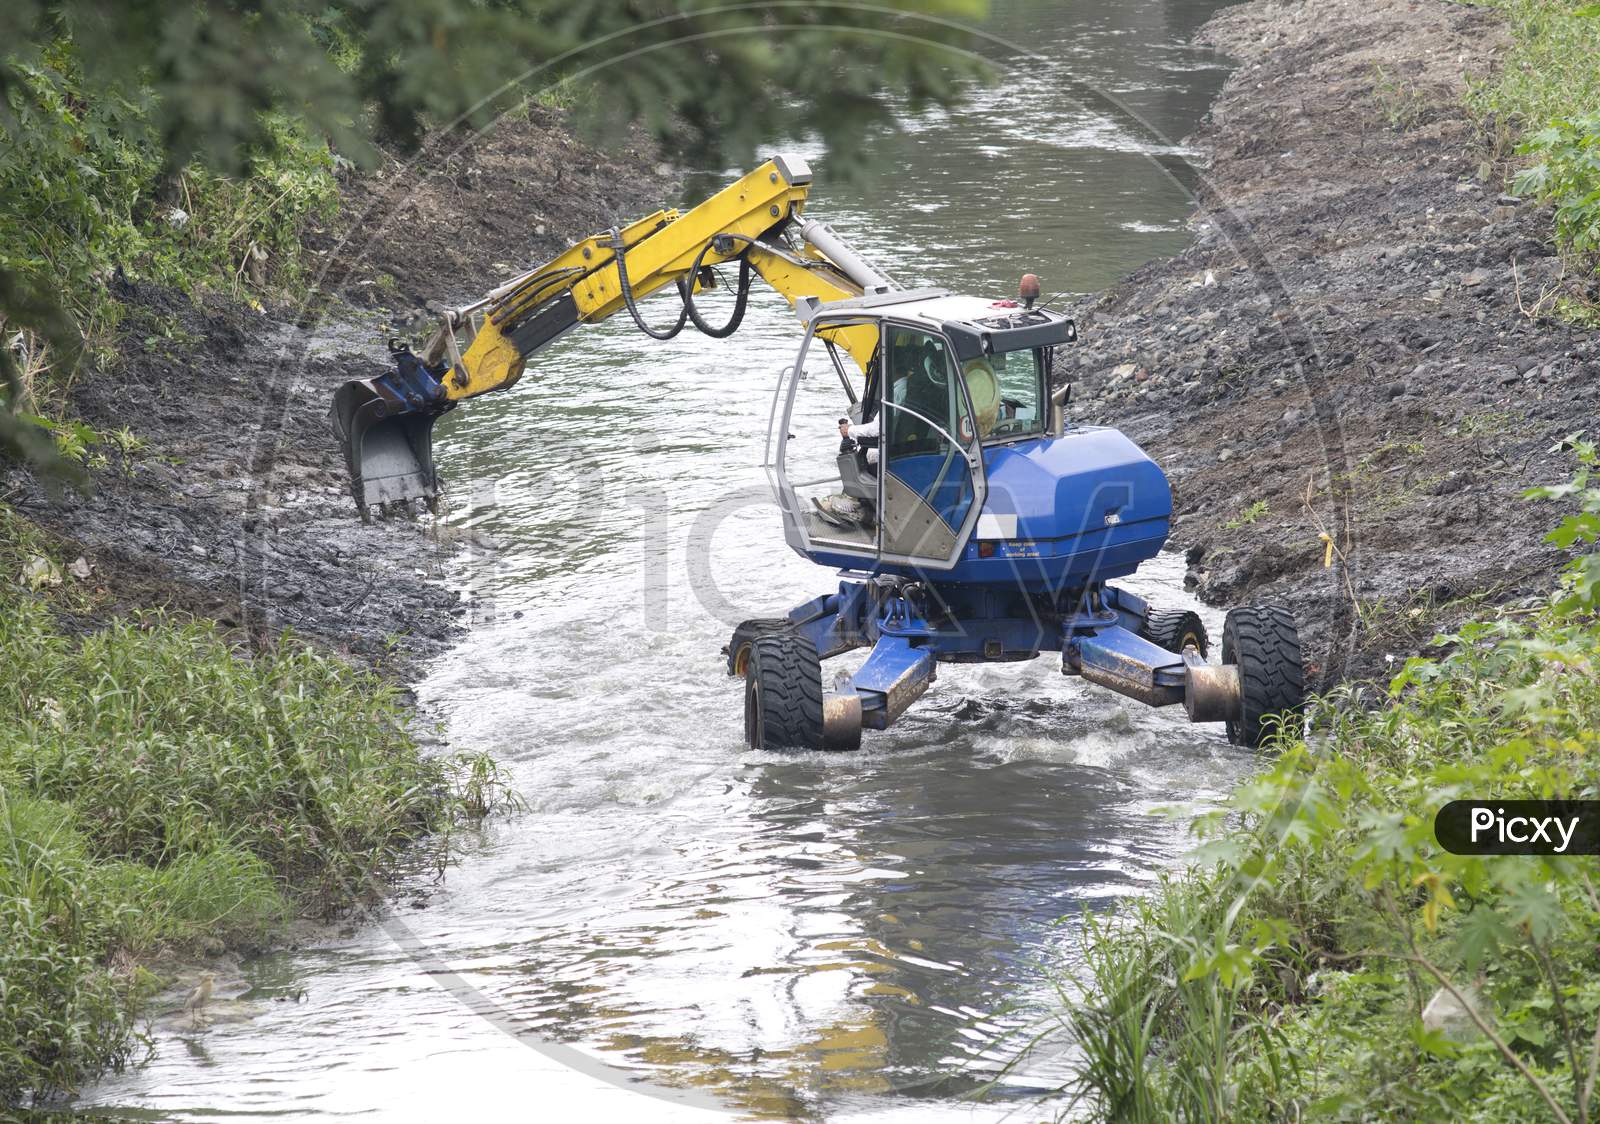 Excavator Performing River Dredging And Clearing Up The River Banks.